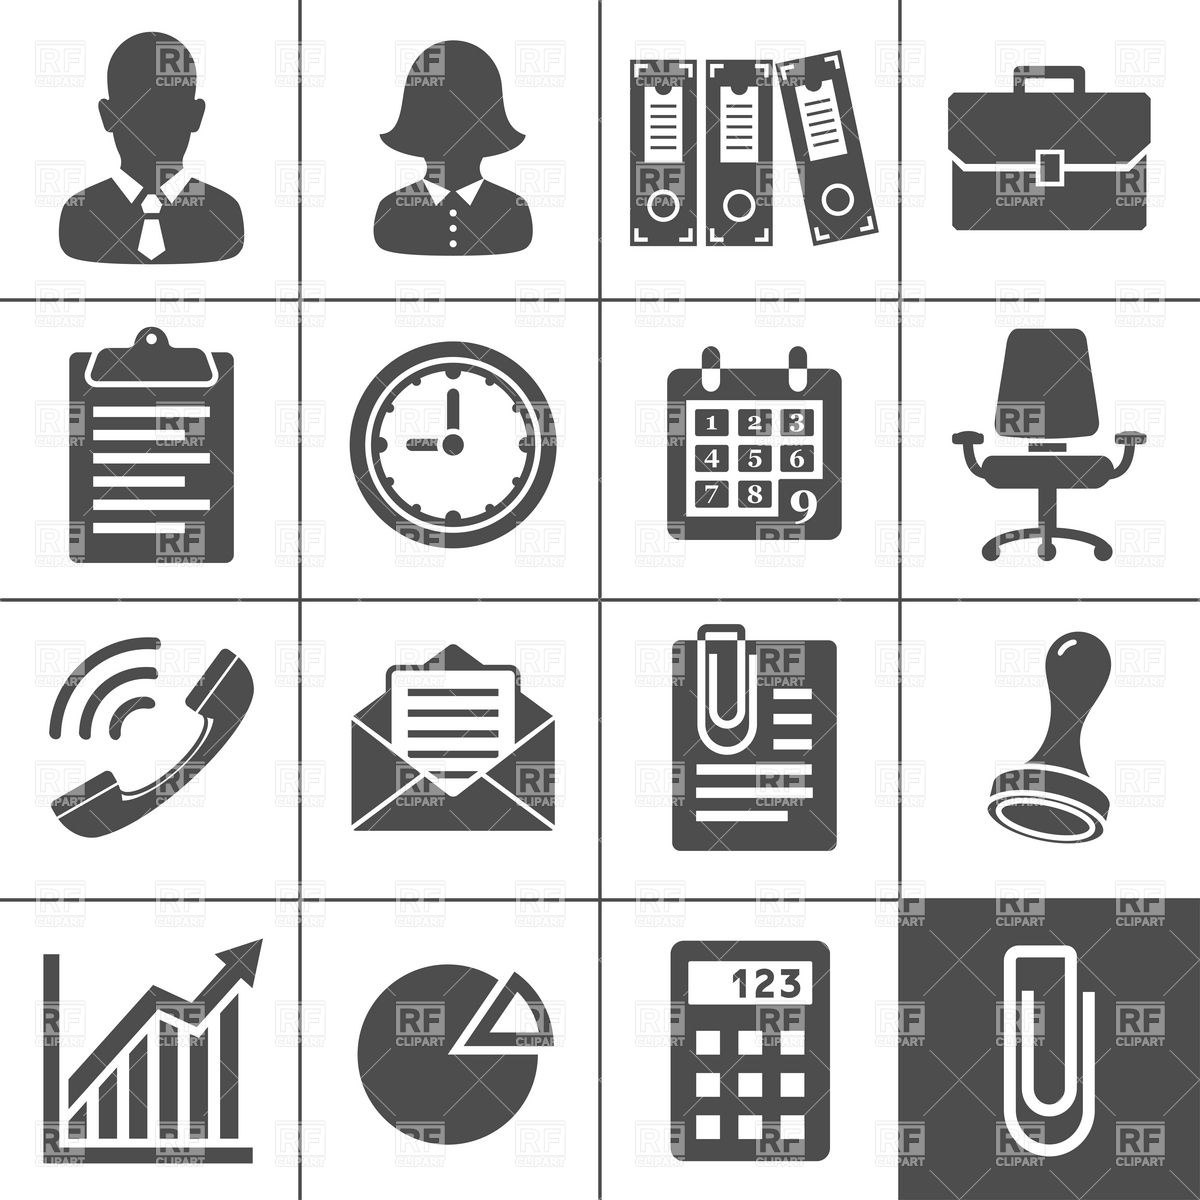 75  Vector Icons - PSD, PNG, Vector EPS Format Download | Design 